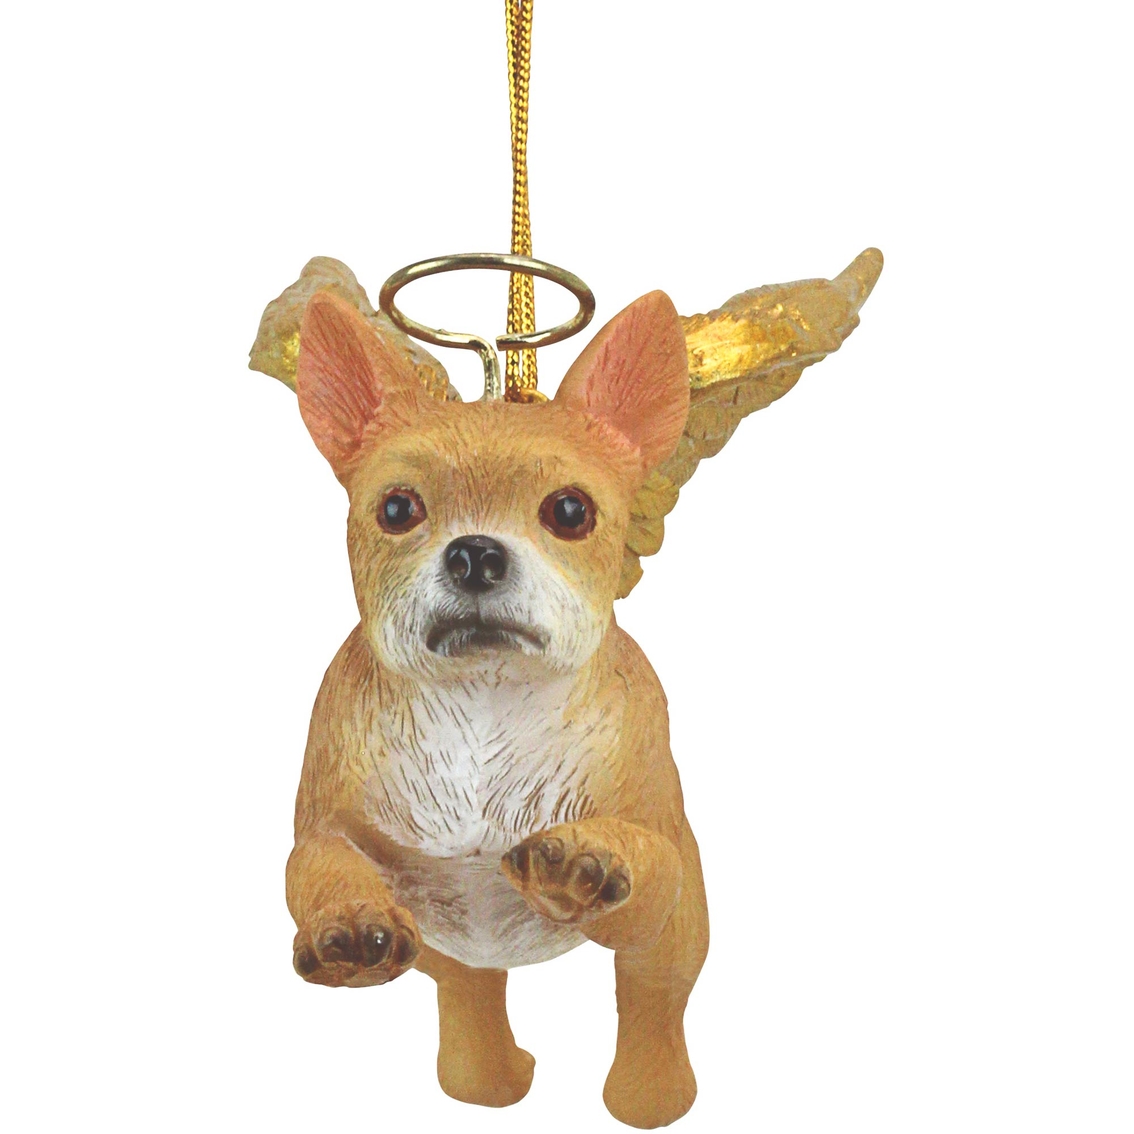 Design Toscano Honor the Pooch - Chihuahua Holiday Dog Angel Ornament - Image 4 of 4